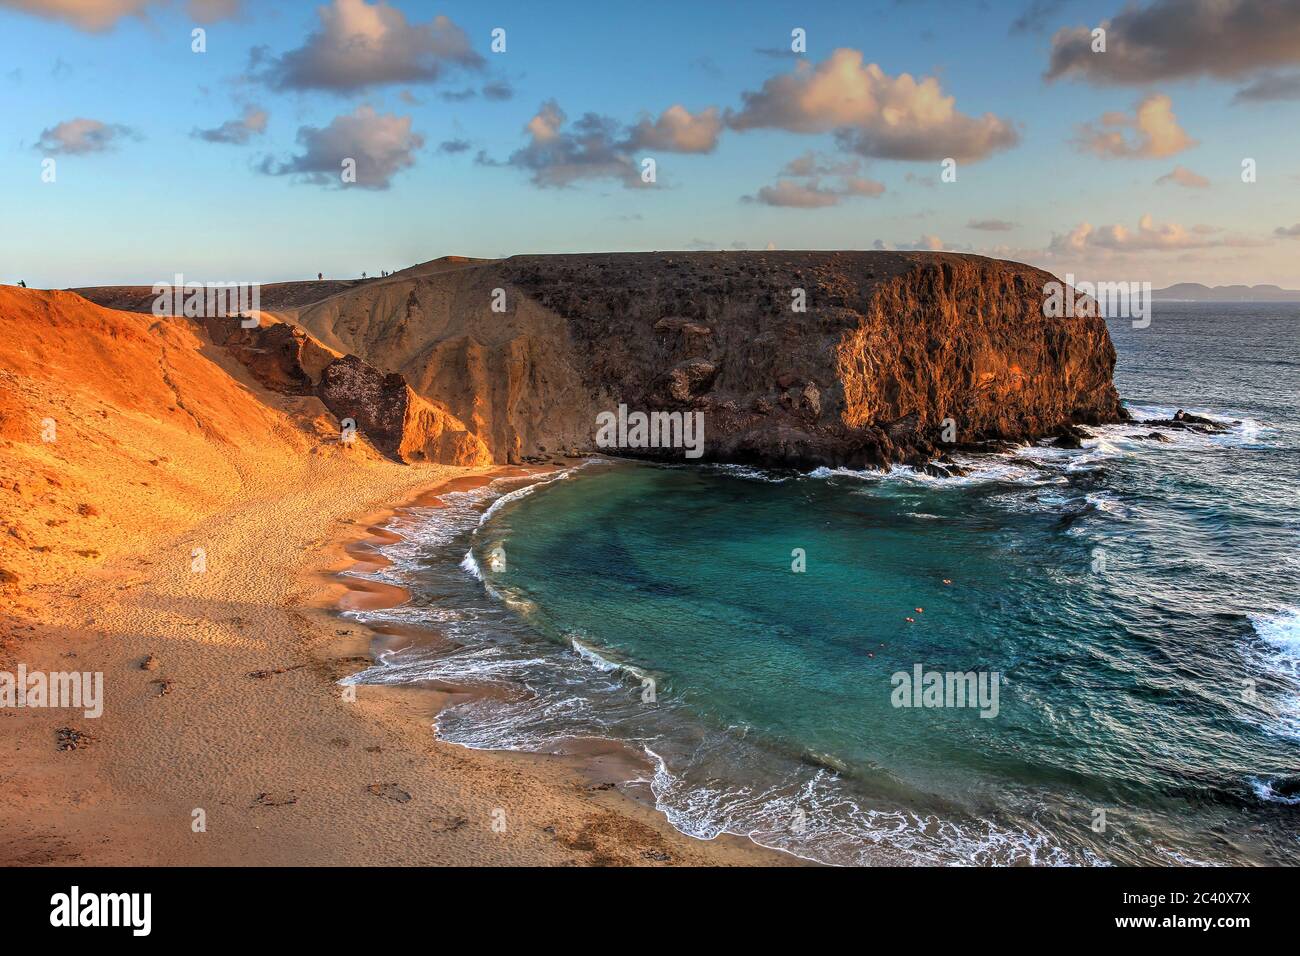 Landscape with the famous Papagayo Beach on the Lanzarote Island in the Canary Islands Archipelago, Spain at sunset time. Stock Photo